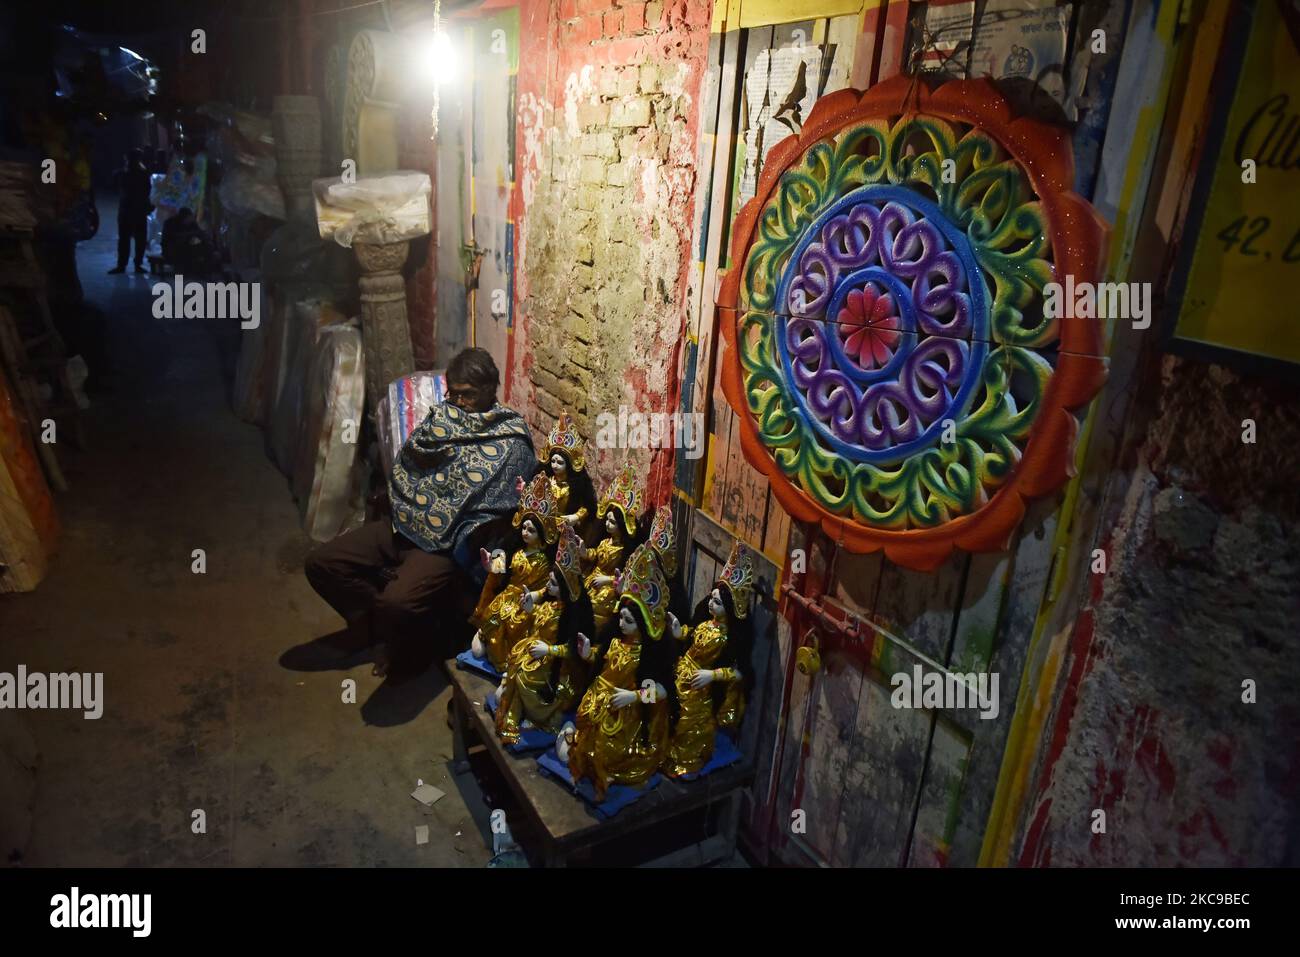 A man waits for his customer as he sells Saraswati goddess in Kolkata, India, 15 February, 2021. Basant Panchami, which will be celebrated on 16 February this year, marks the advent of spring. (Photo by Indranil Aditya/NurPhoto) Stock Photo